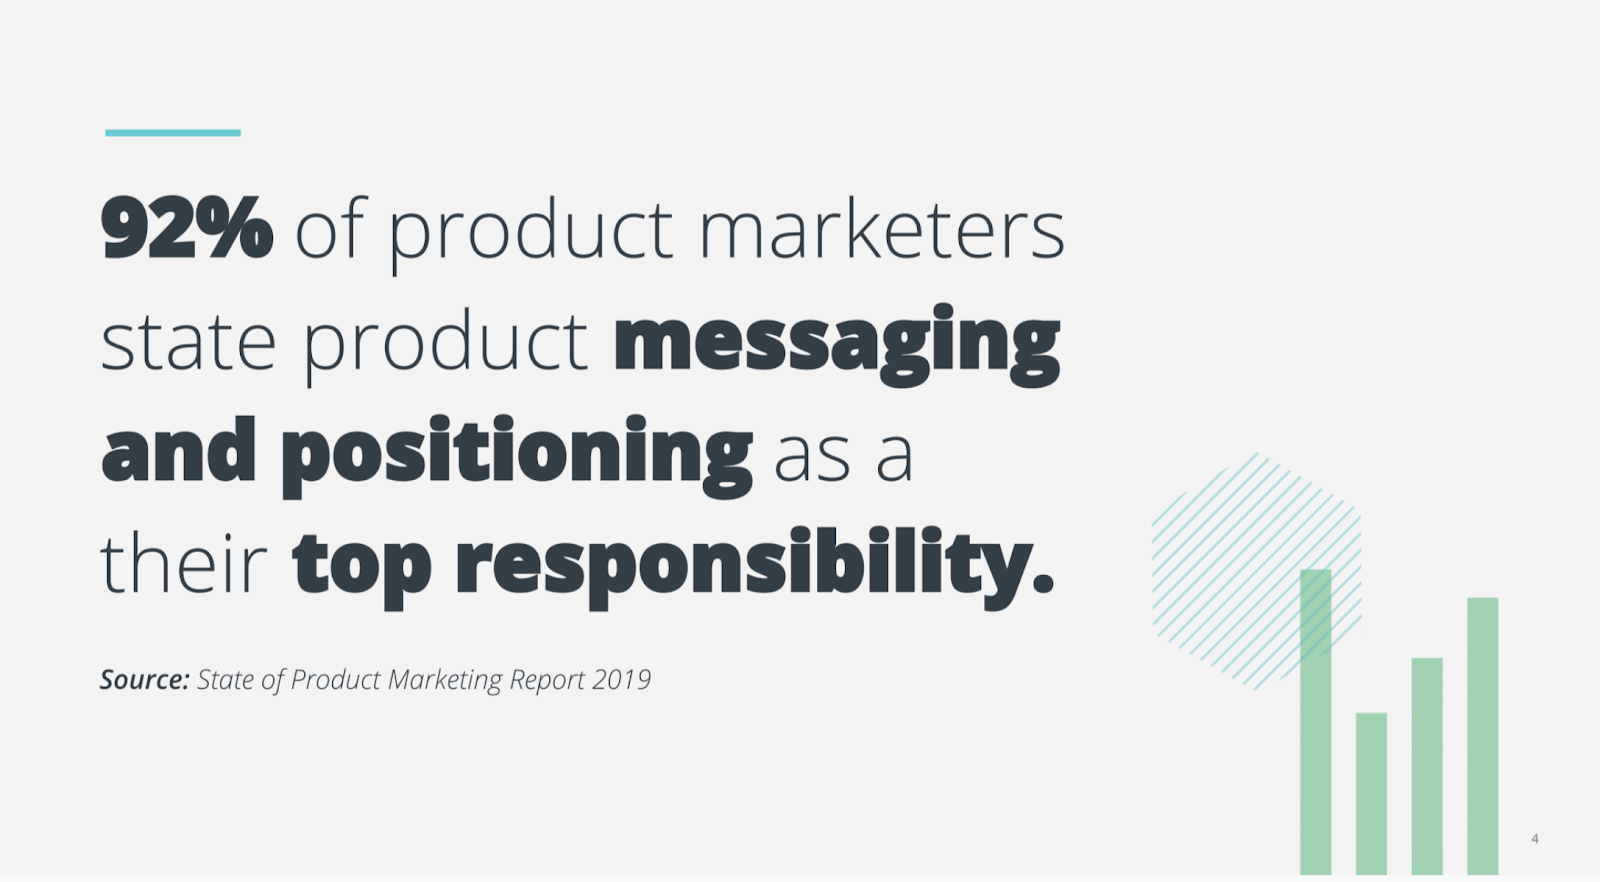 According to the State of Product Marketing Report 2019, 92% of product marketers state product messaging and positioning as their top responsibility.